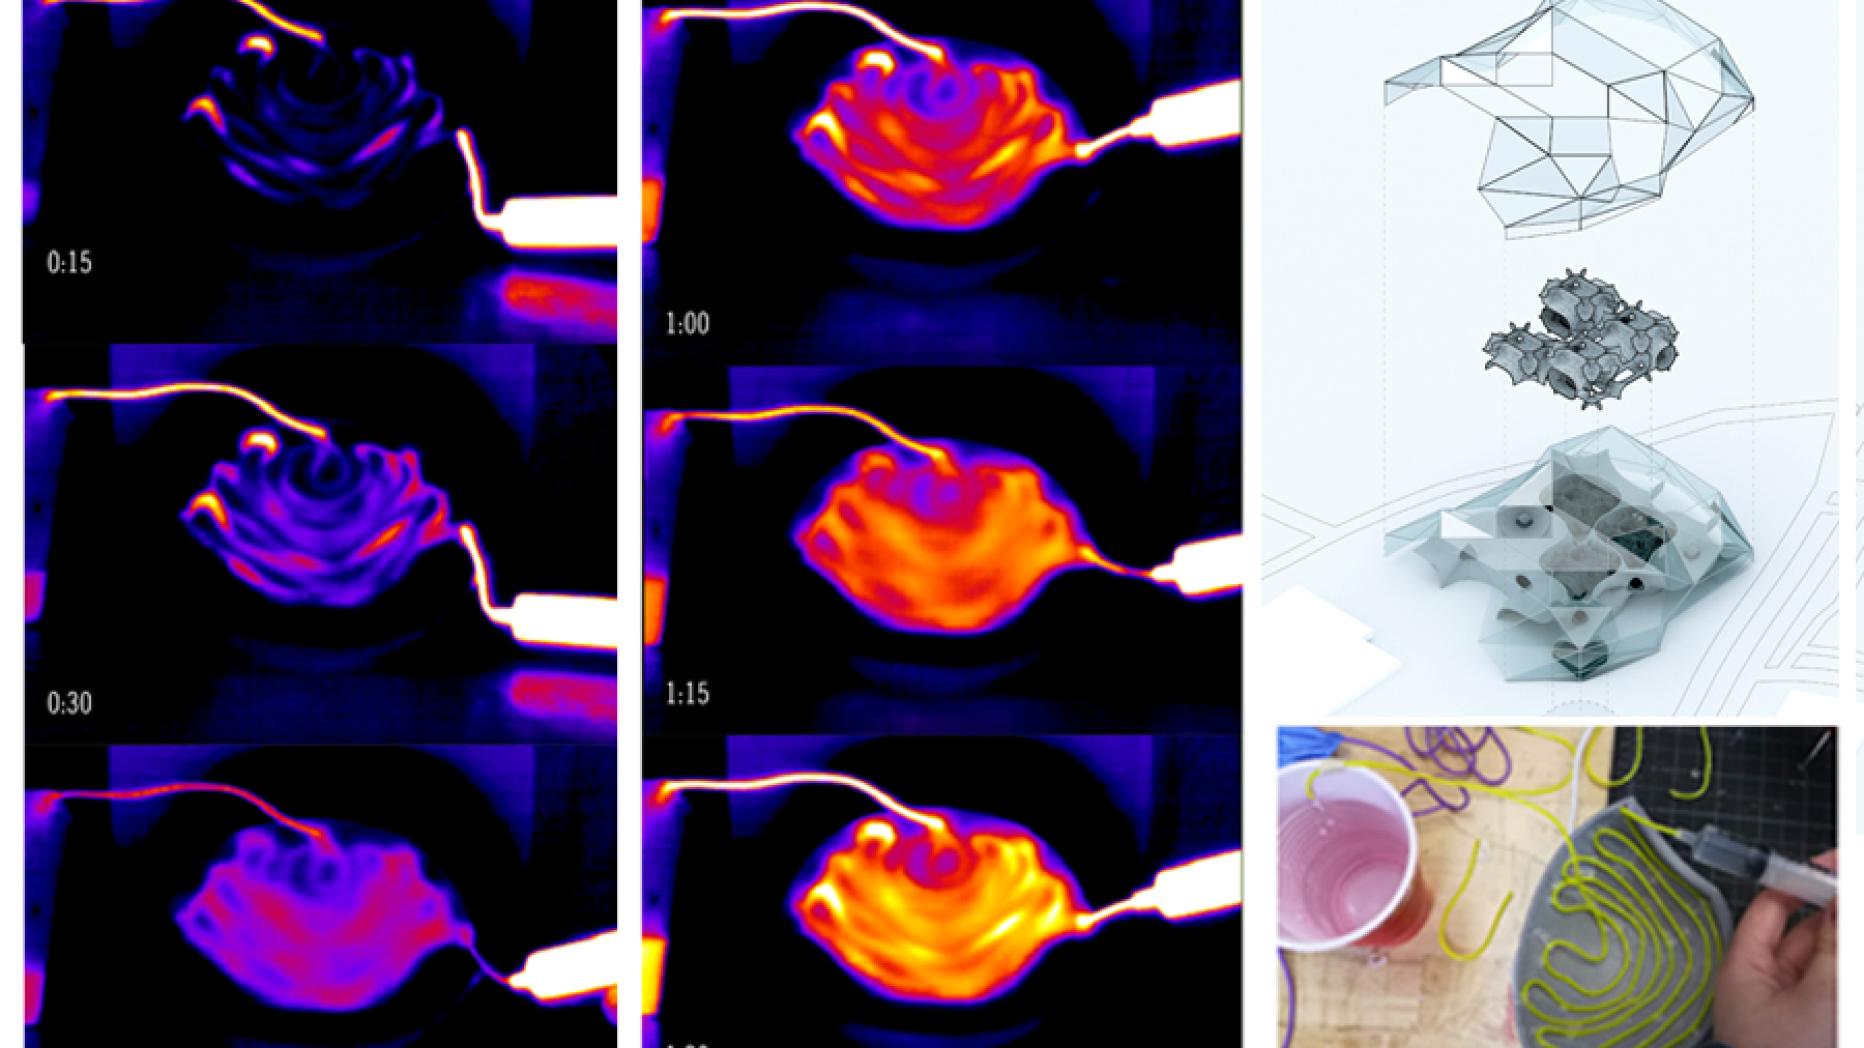 thermal images of an experiment injecting hot water to a tube in a scaled model of architecutral curved surface